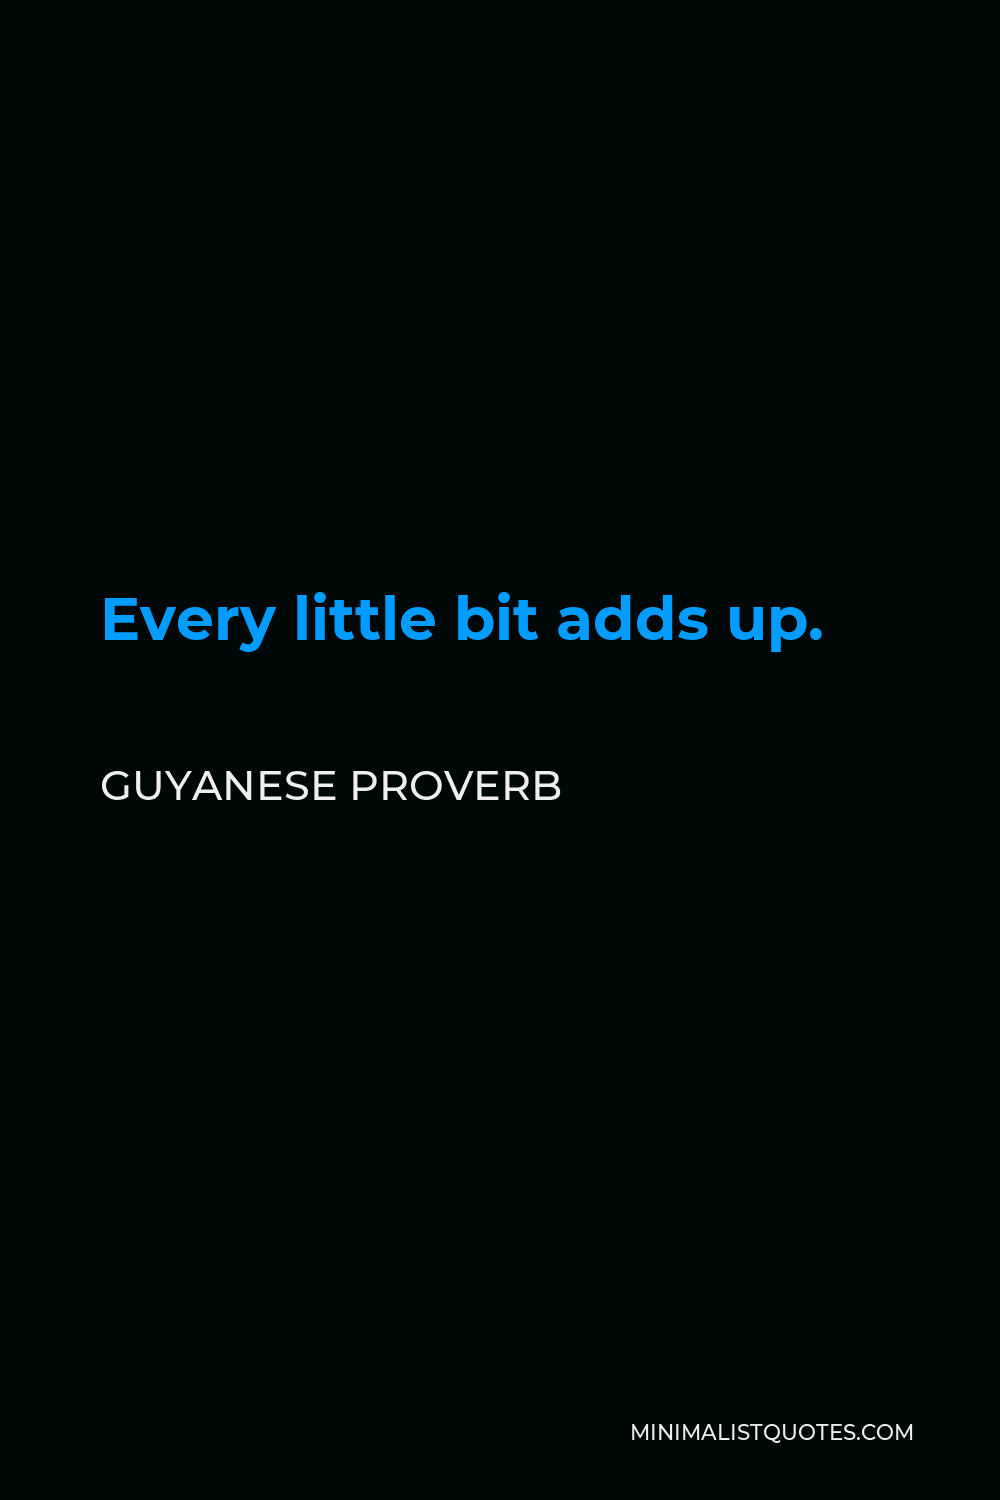 Guyanese Proverb Quote - Every little bit adds up.